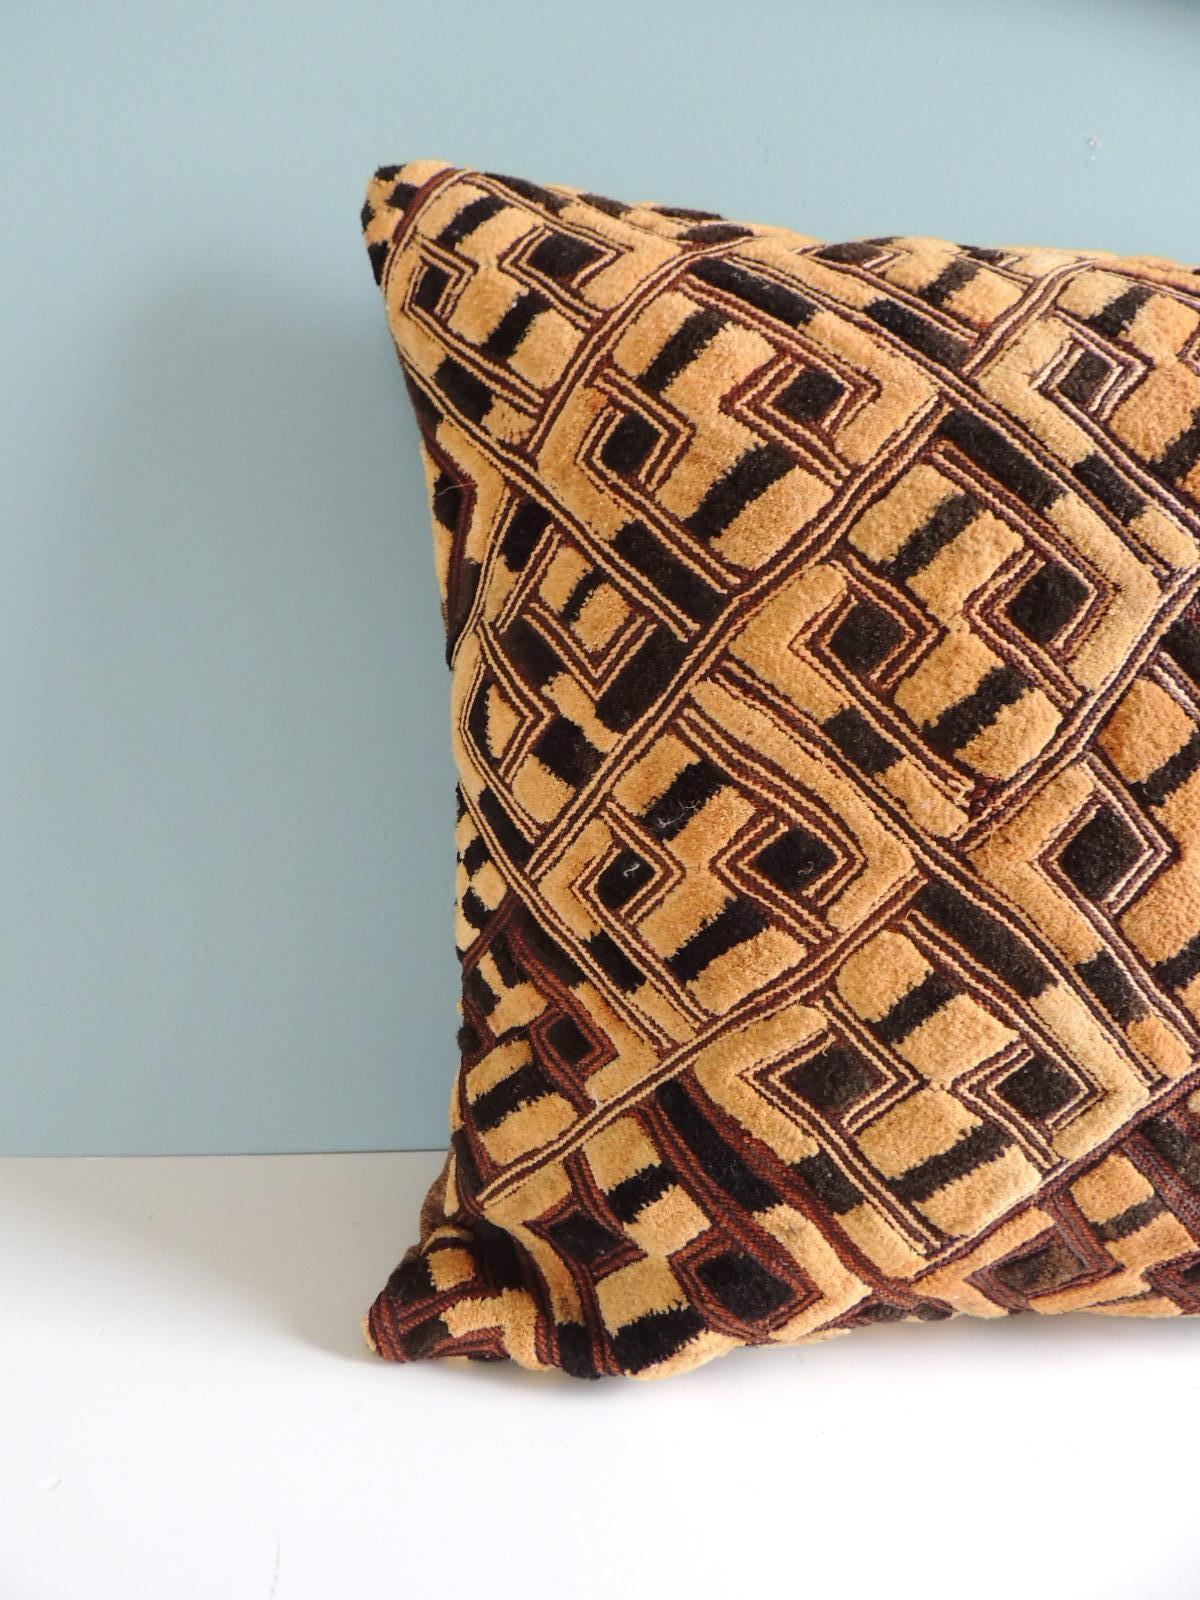 Hand-Crafted Vintage Black and Tan Raffia Velvet Kuba African Square Decorative Pillow